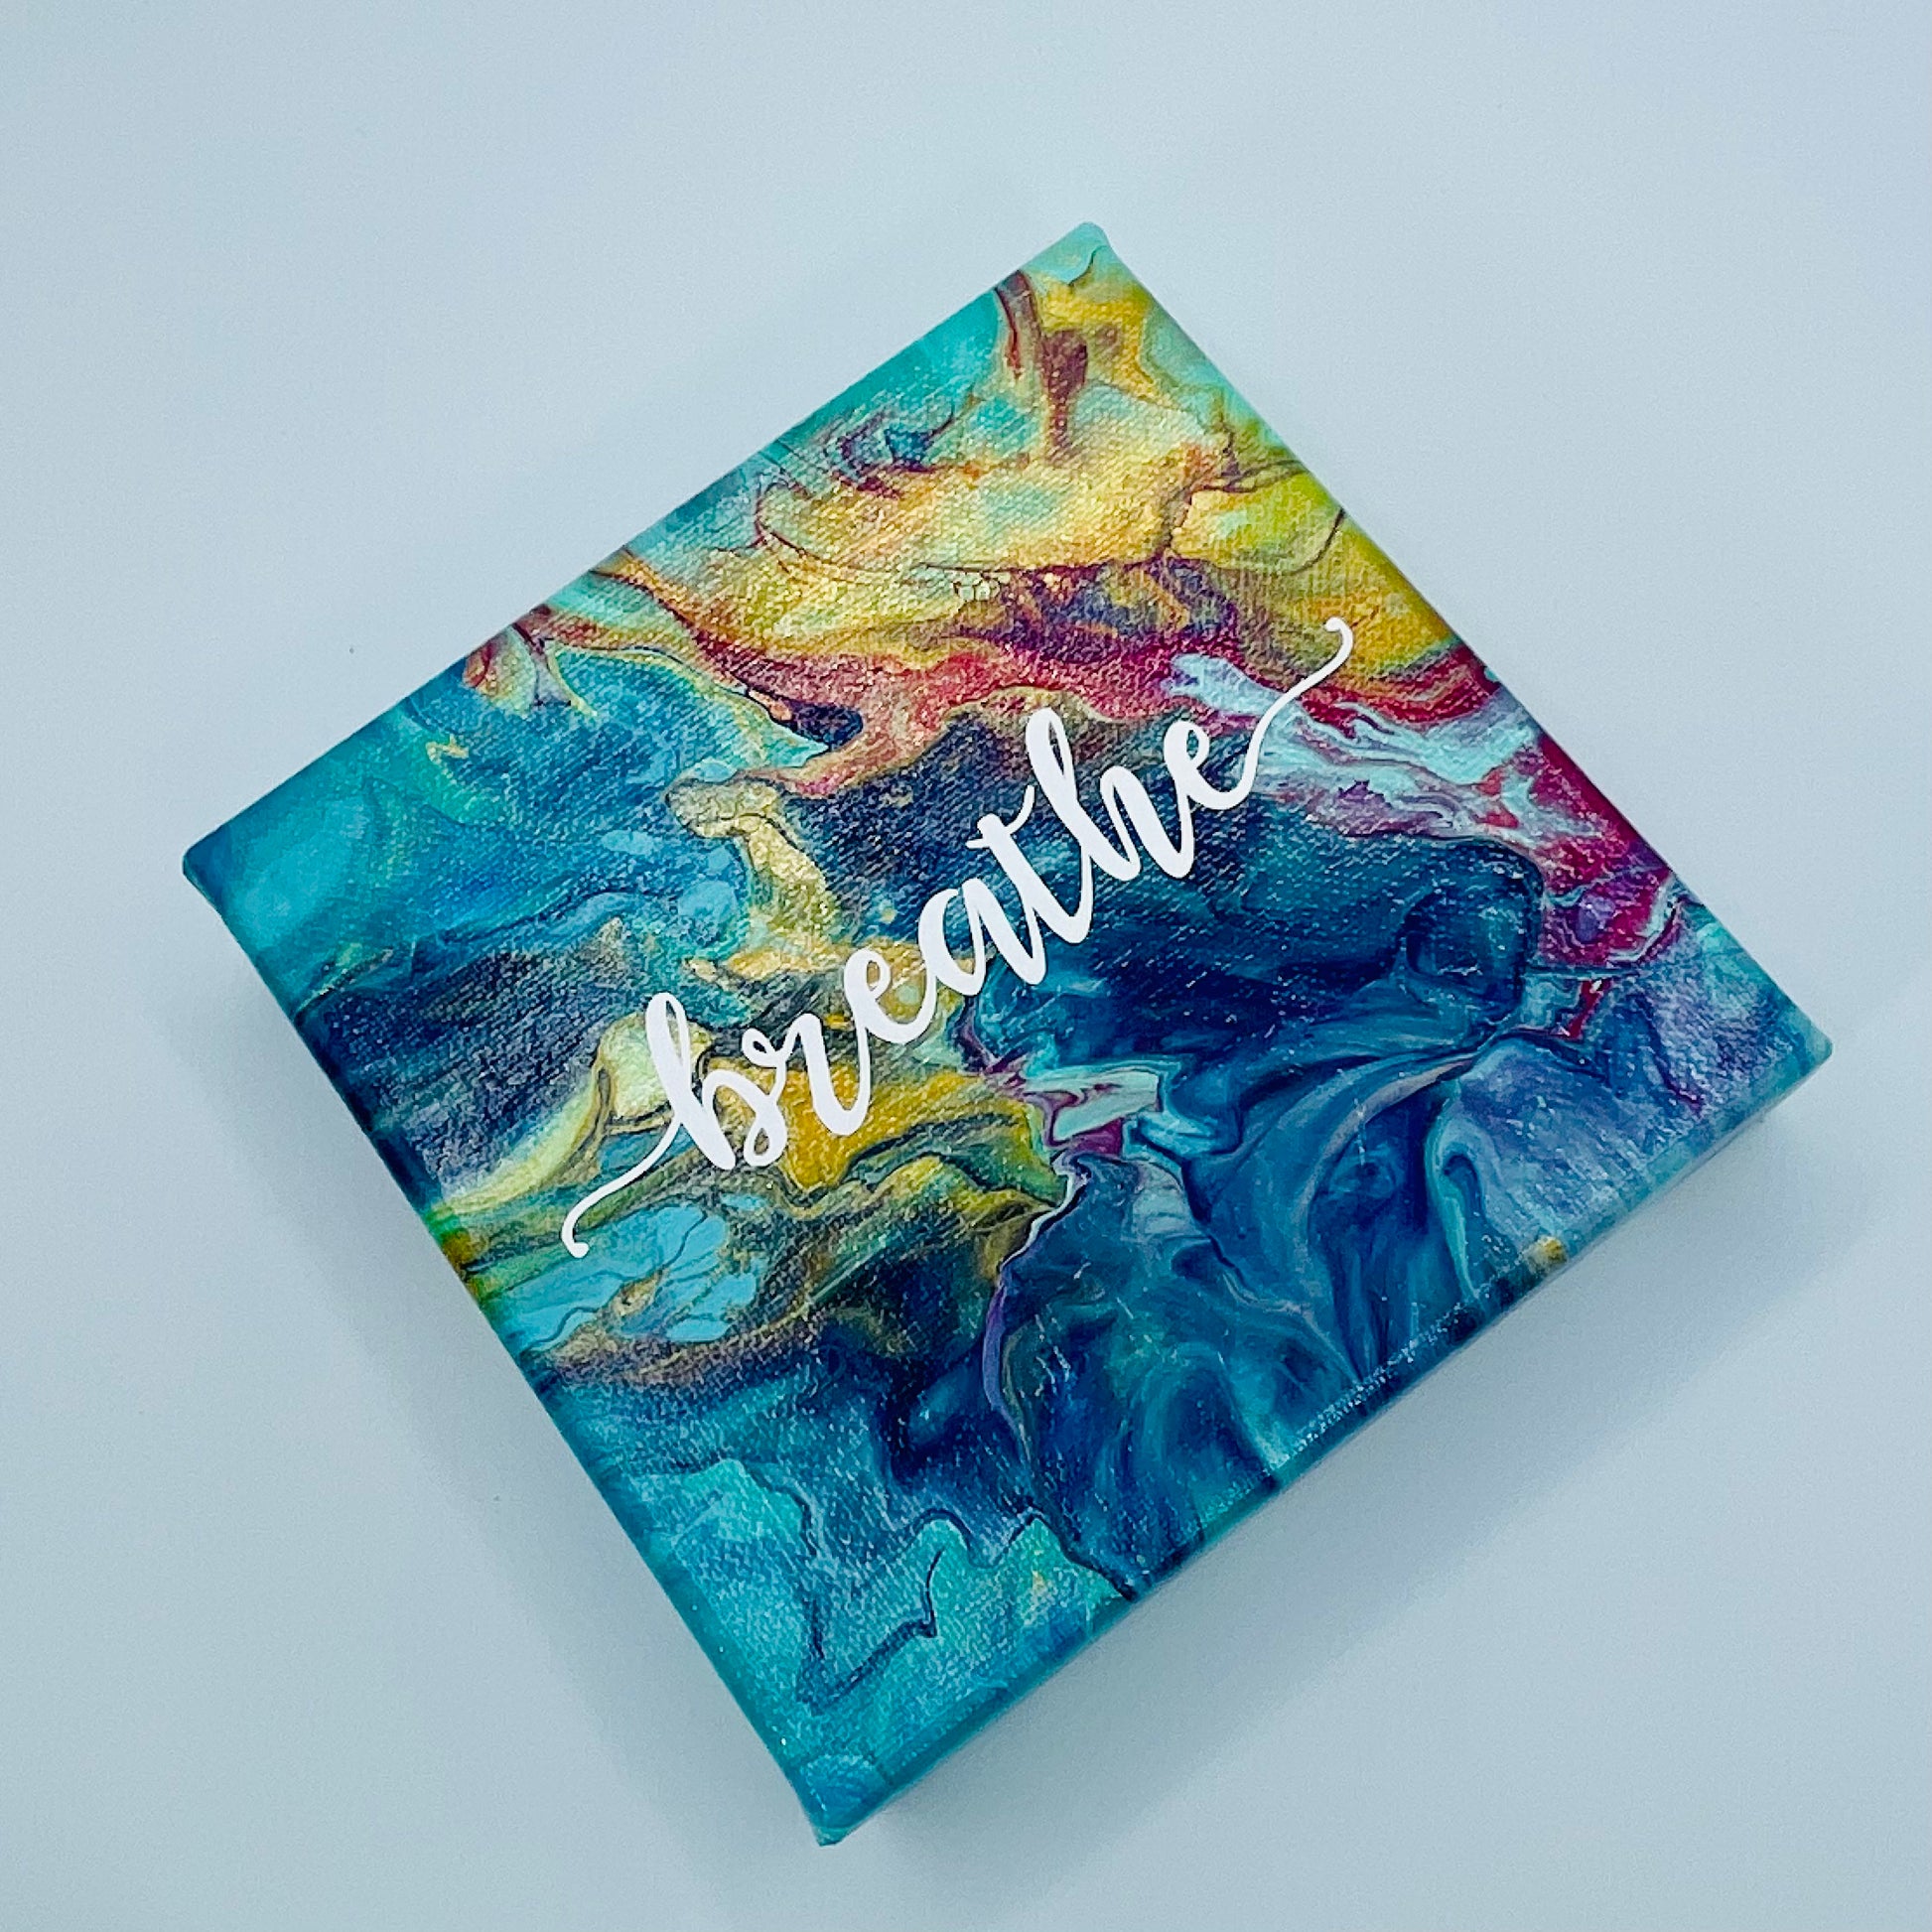 The Mudra Breathe Block. A colorful hand painted painting that says 'breathe'